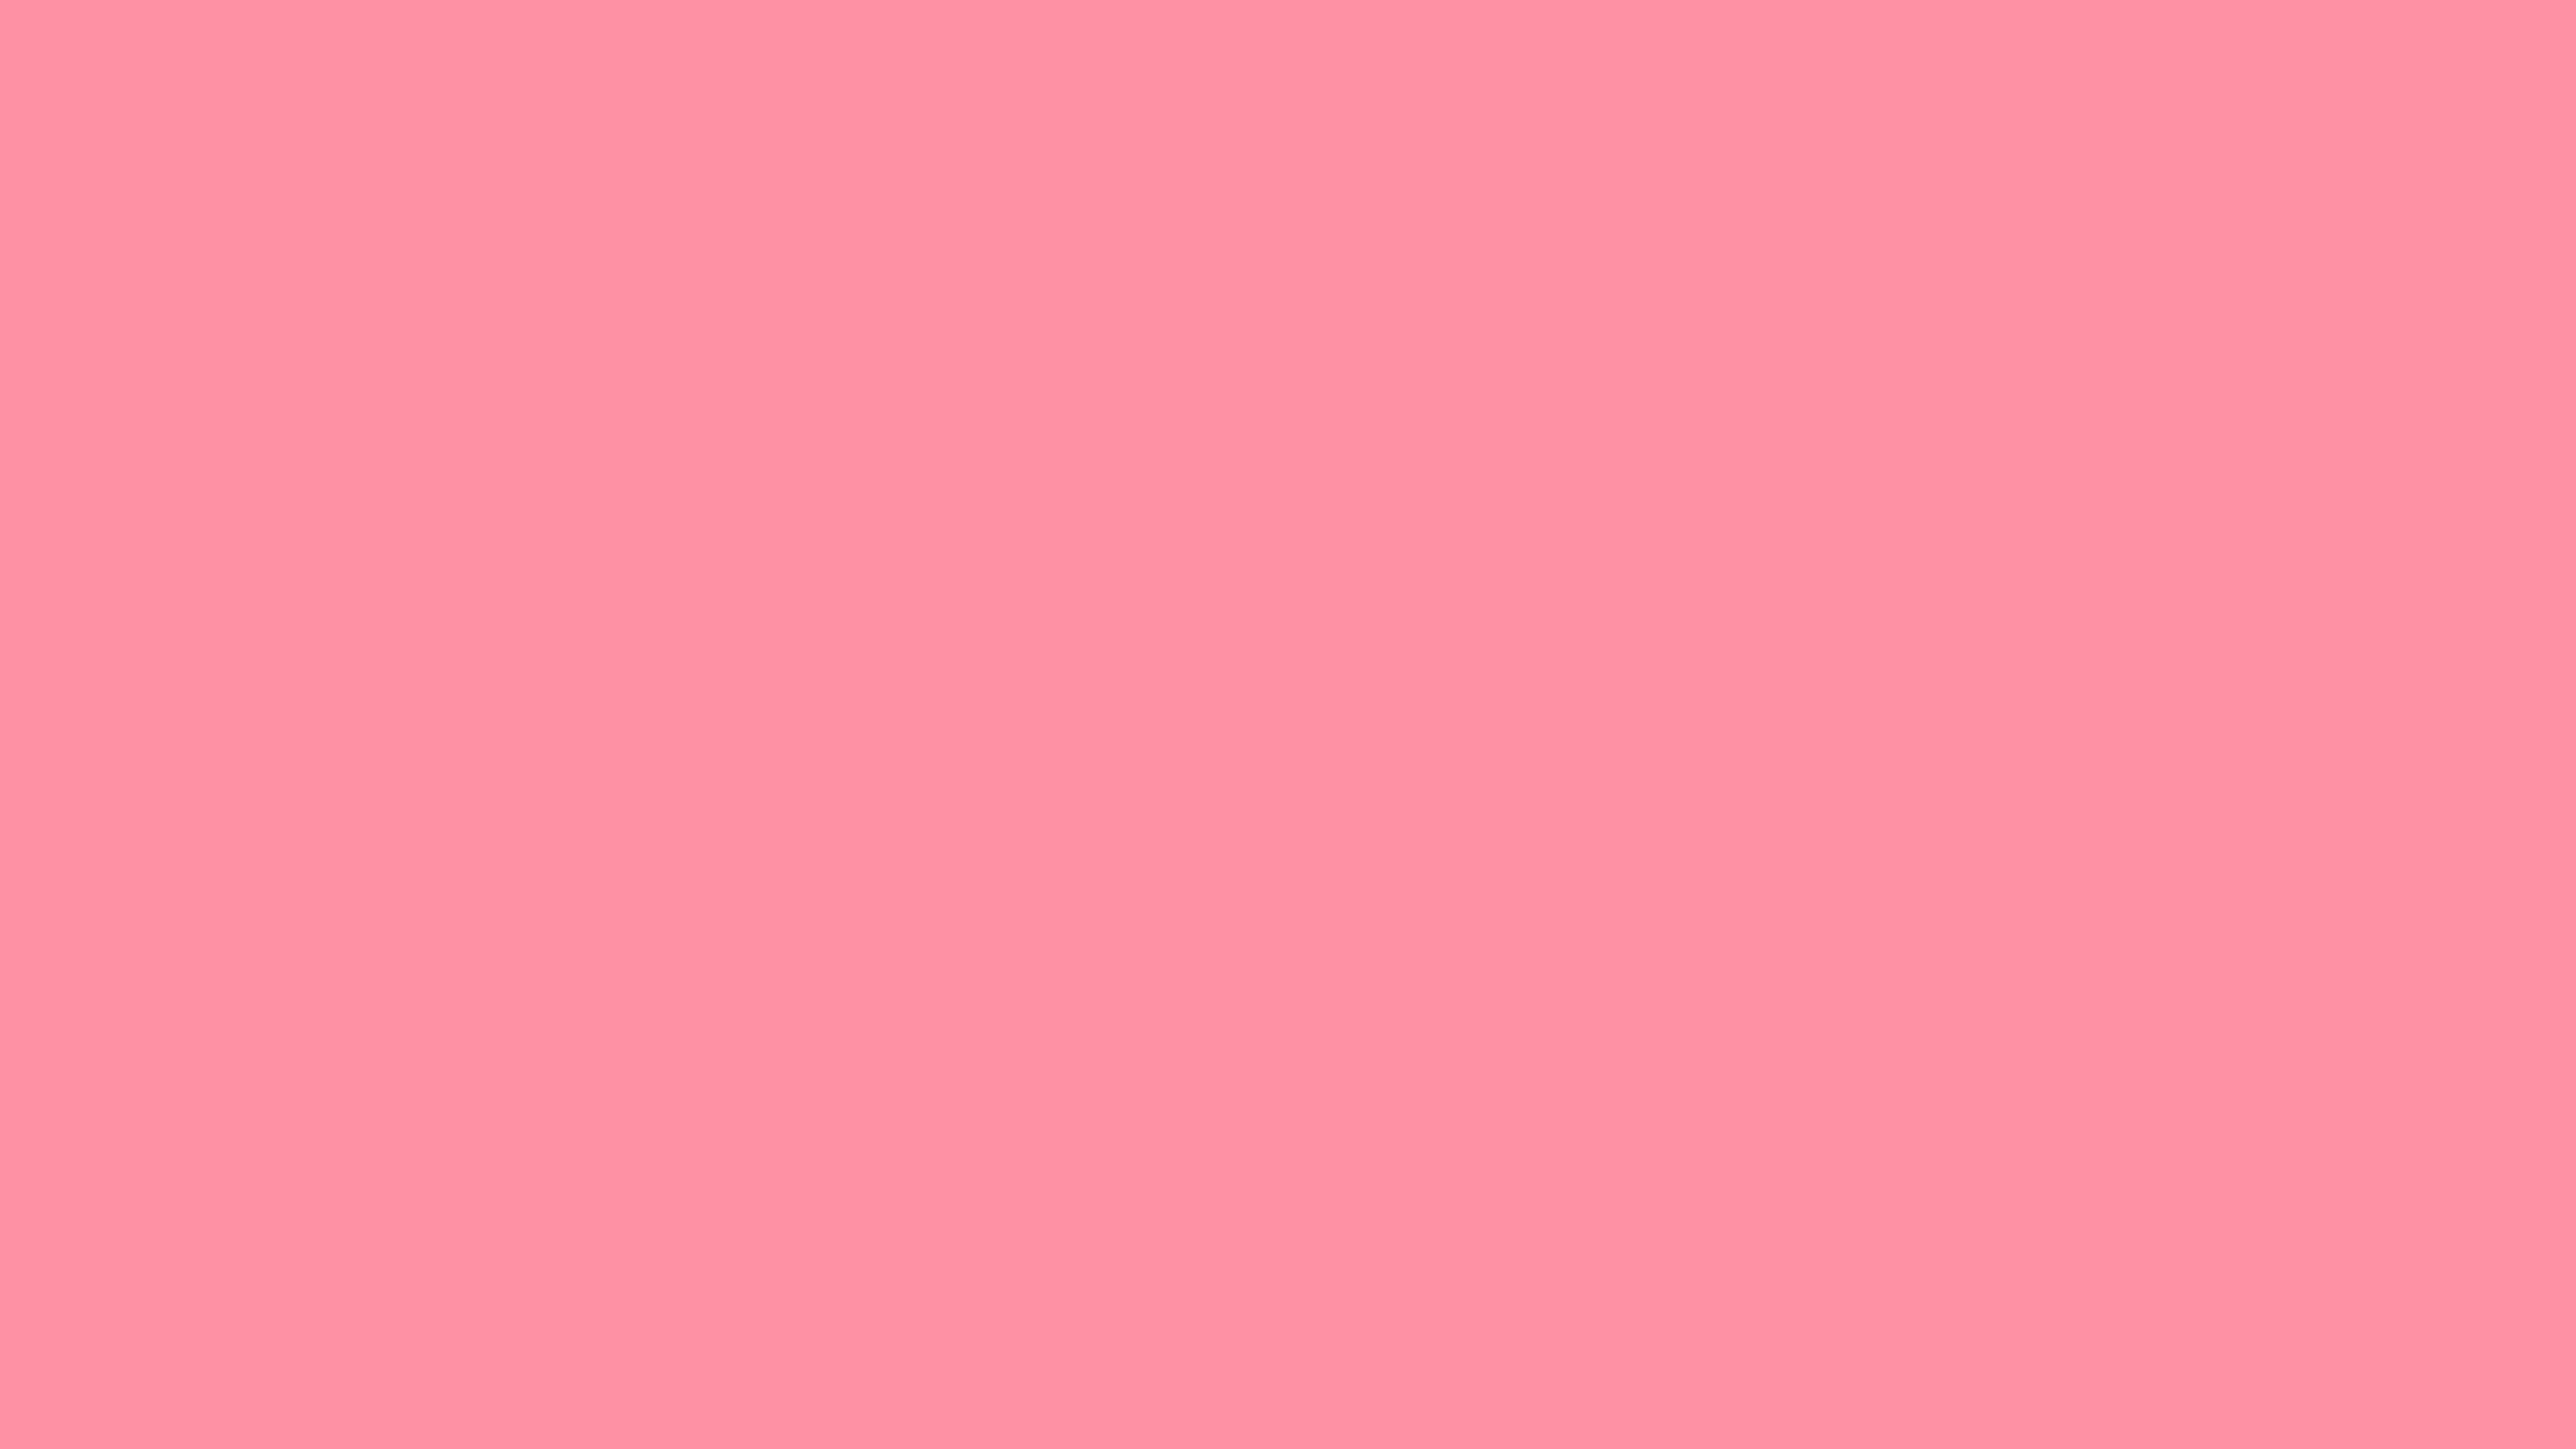 5120x2880 Salmon Pink Solid Color Background